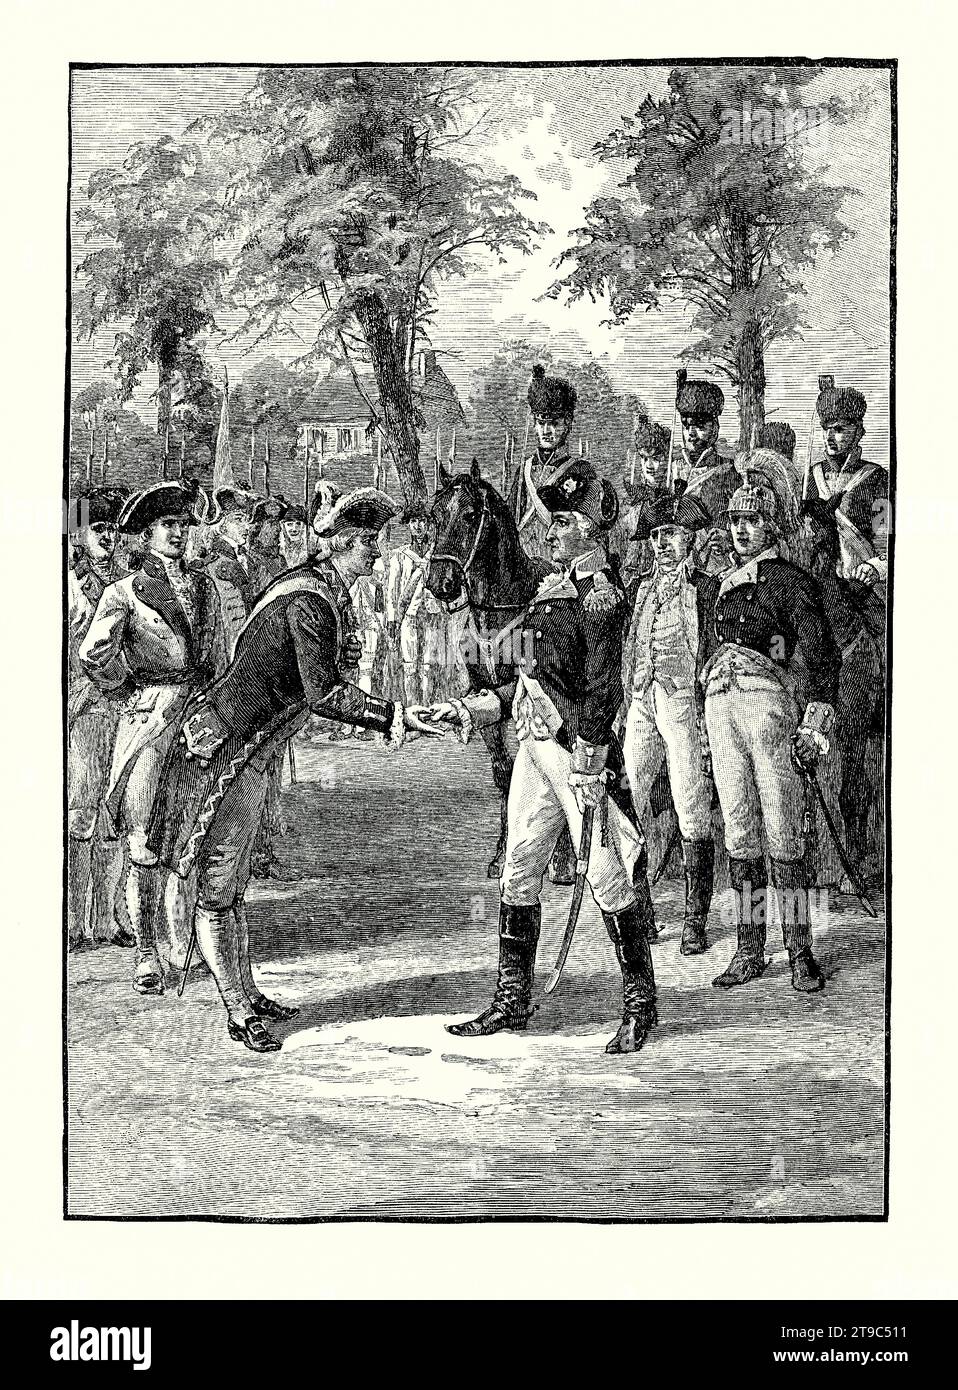 An old engraving showing General George Washington meeting Jean-Baptiste Donatien de Vimeur, le Comte de Rochambeau at Hartford, Connecticut, USA in late September 1780. It is from an American history book of 1895. Rochambeau, in command of the French forces and Continental Army commander Washington held a series of meetings throughout that winter discussing their plans for a major operation in 1781 against the British. The collaboration between the two led to the victory at Yorktown, Virginia that would assure American independence. Stock Photo